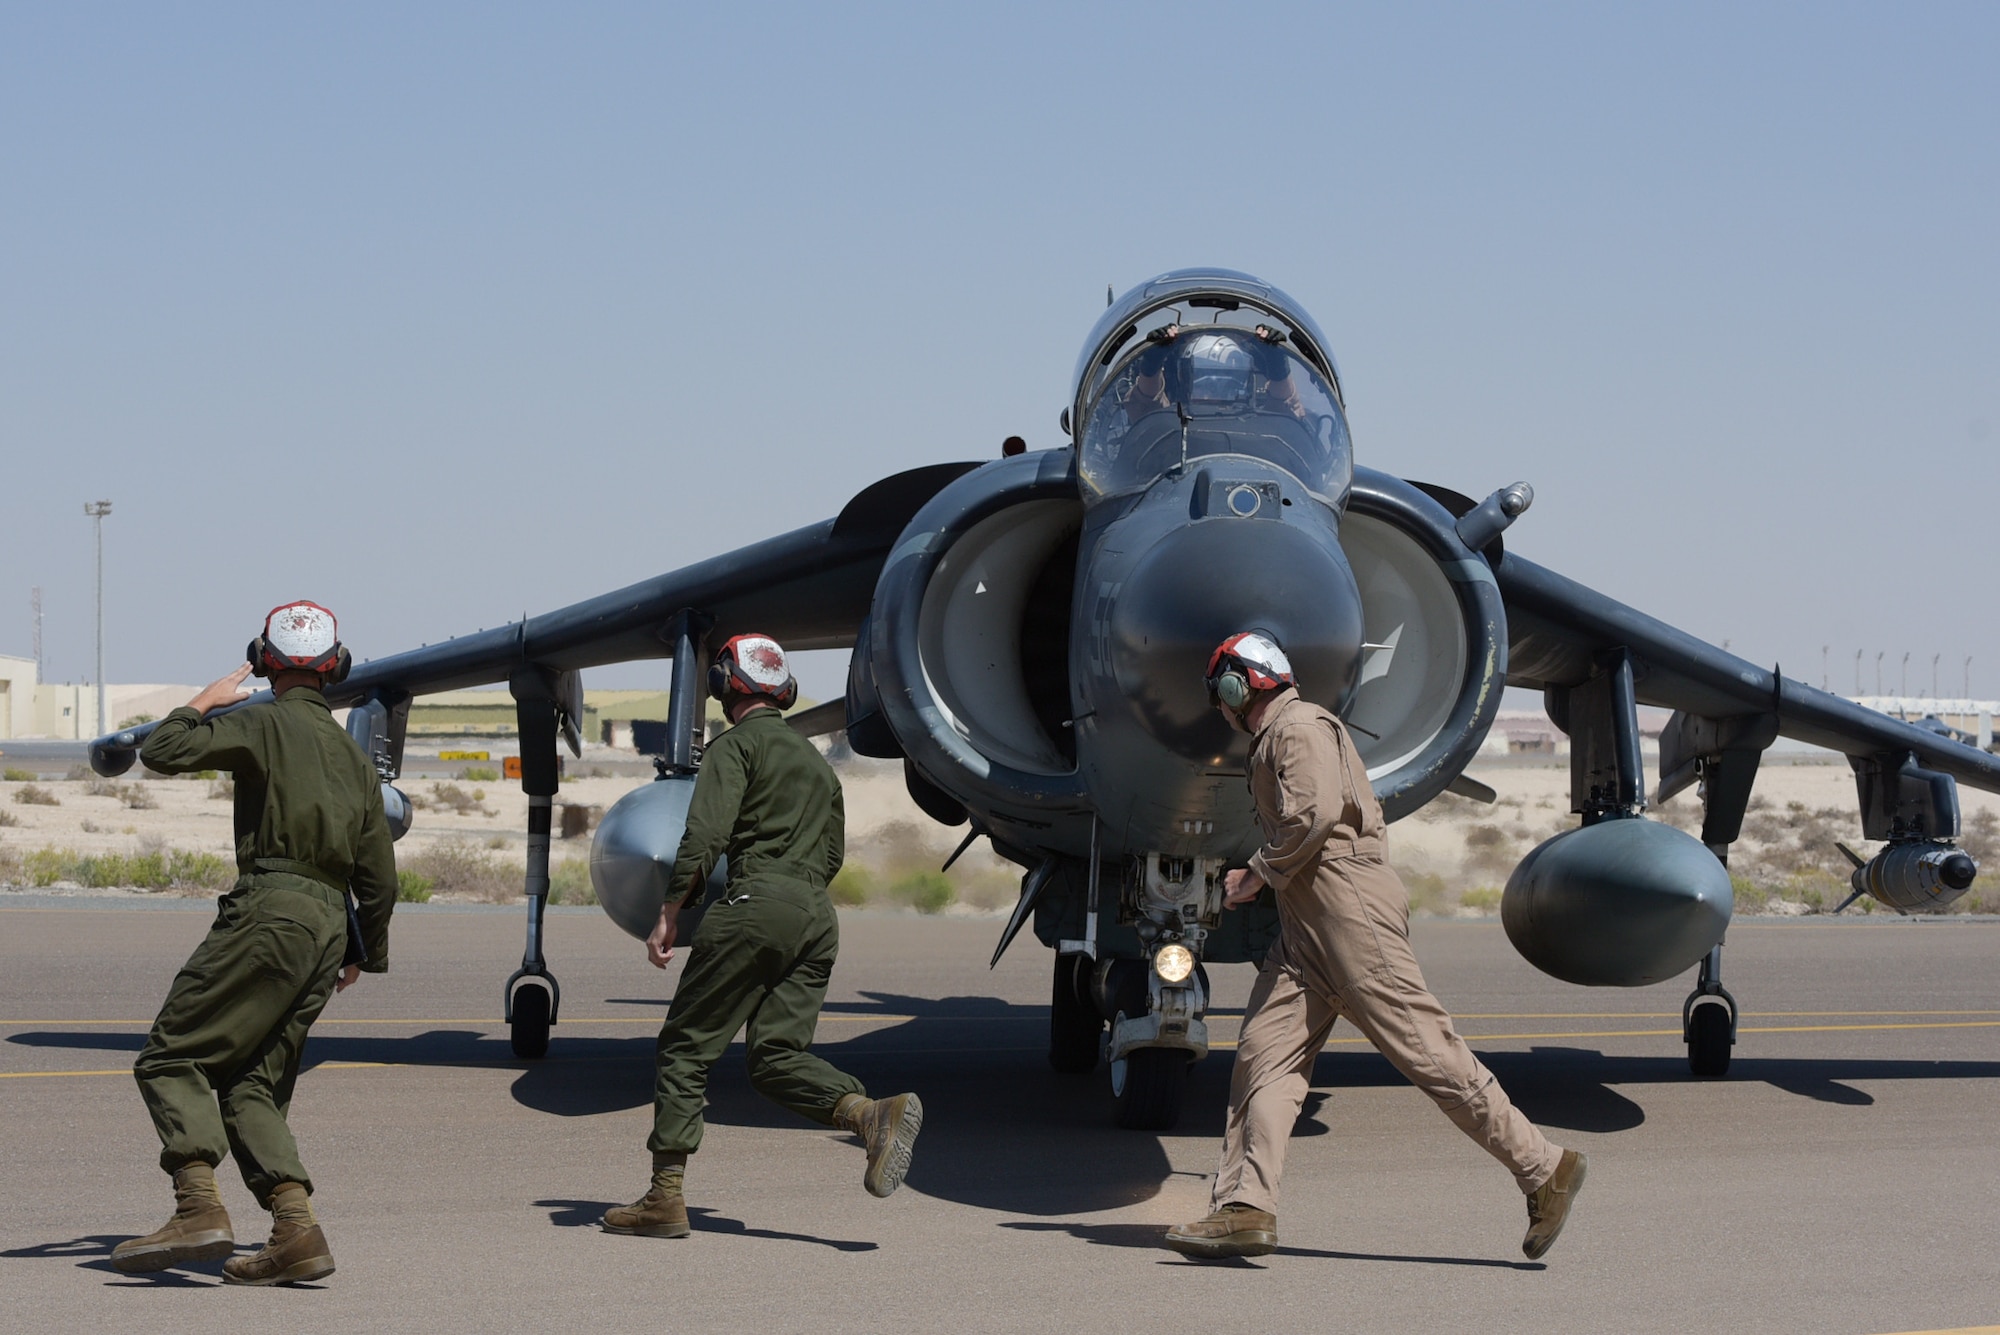 Maintainers from the 22nd Marine Expeditionary Unit run from wing to wing to de-arm ordnance from the AV-8B Harrier II after landing April 16, 2019, at Al Dhafra Air Base, United Arab Emirates.